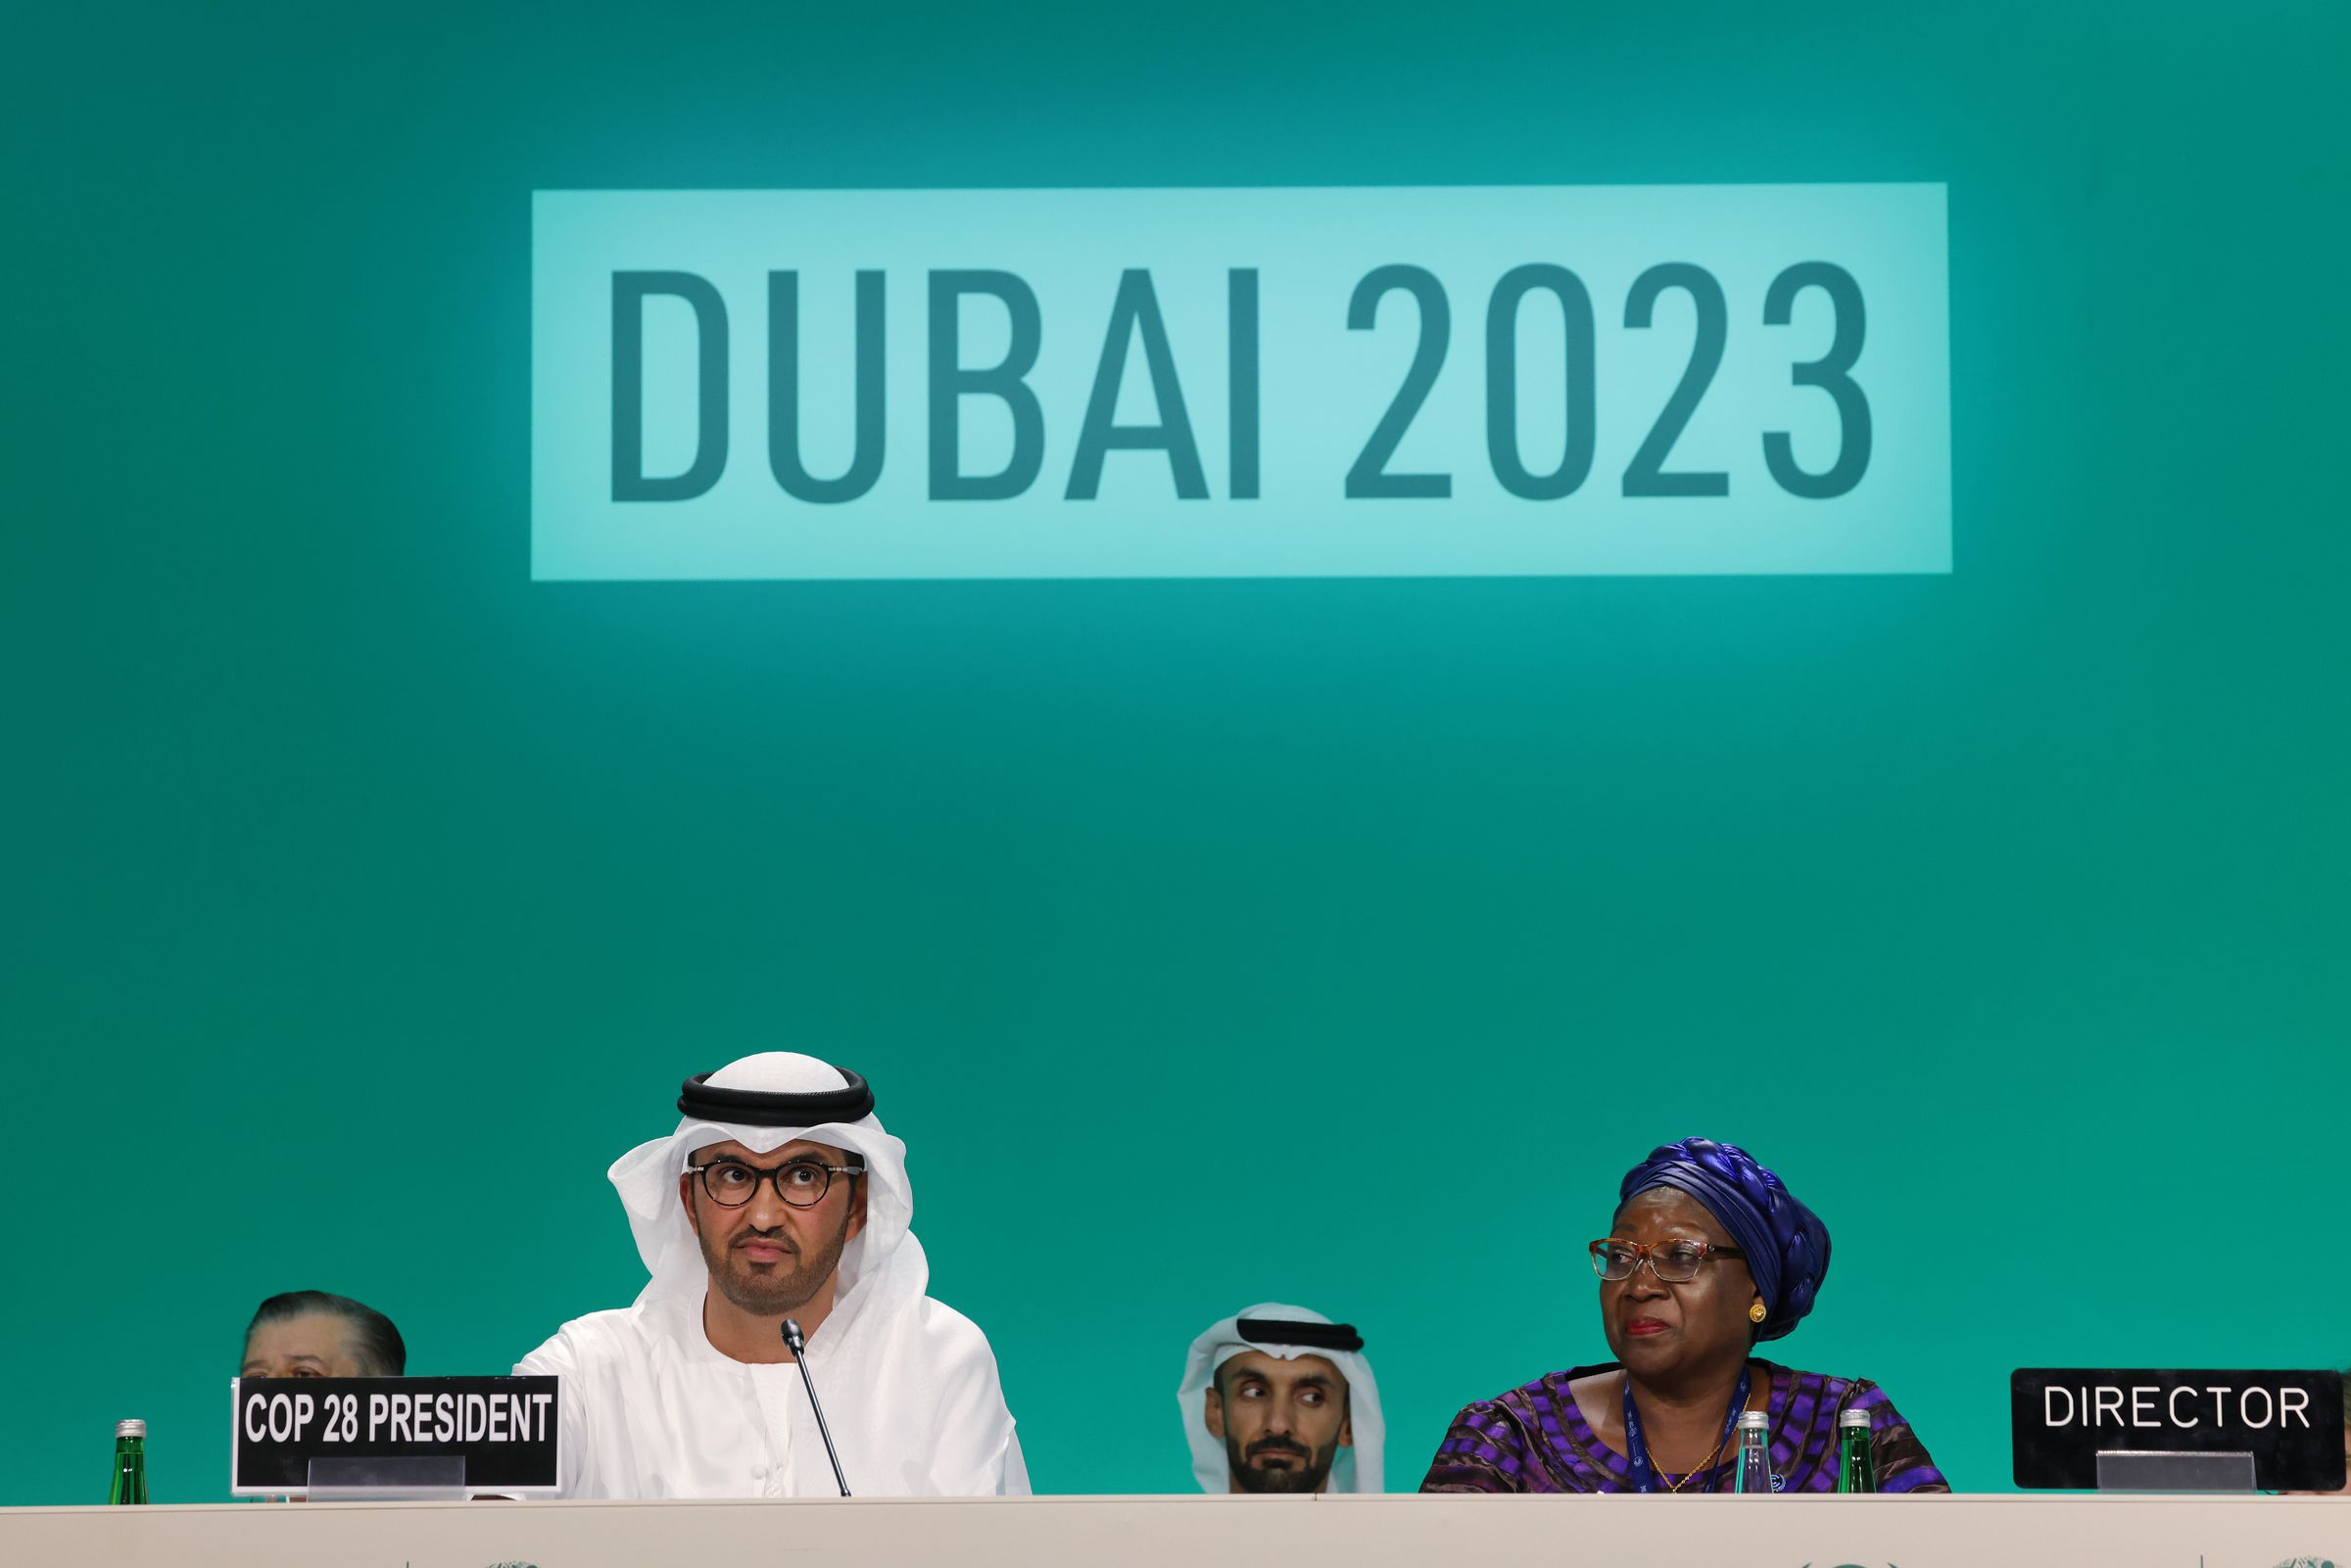 The future of fossil fuels could be decided in Dubai